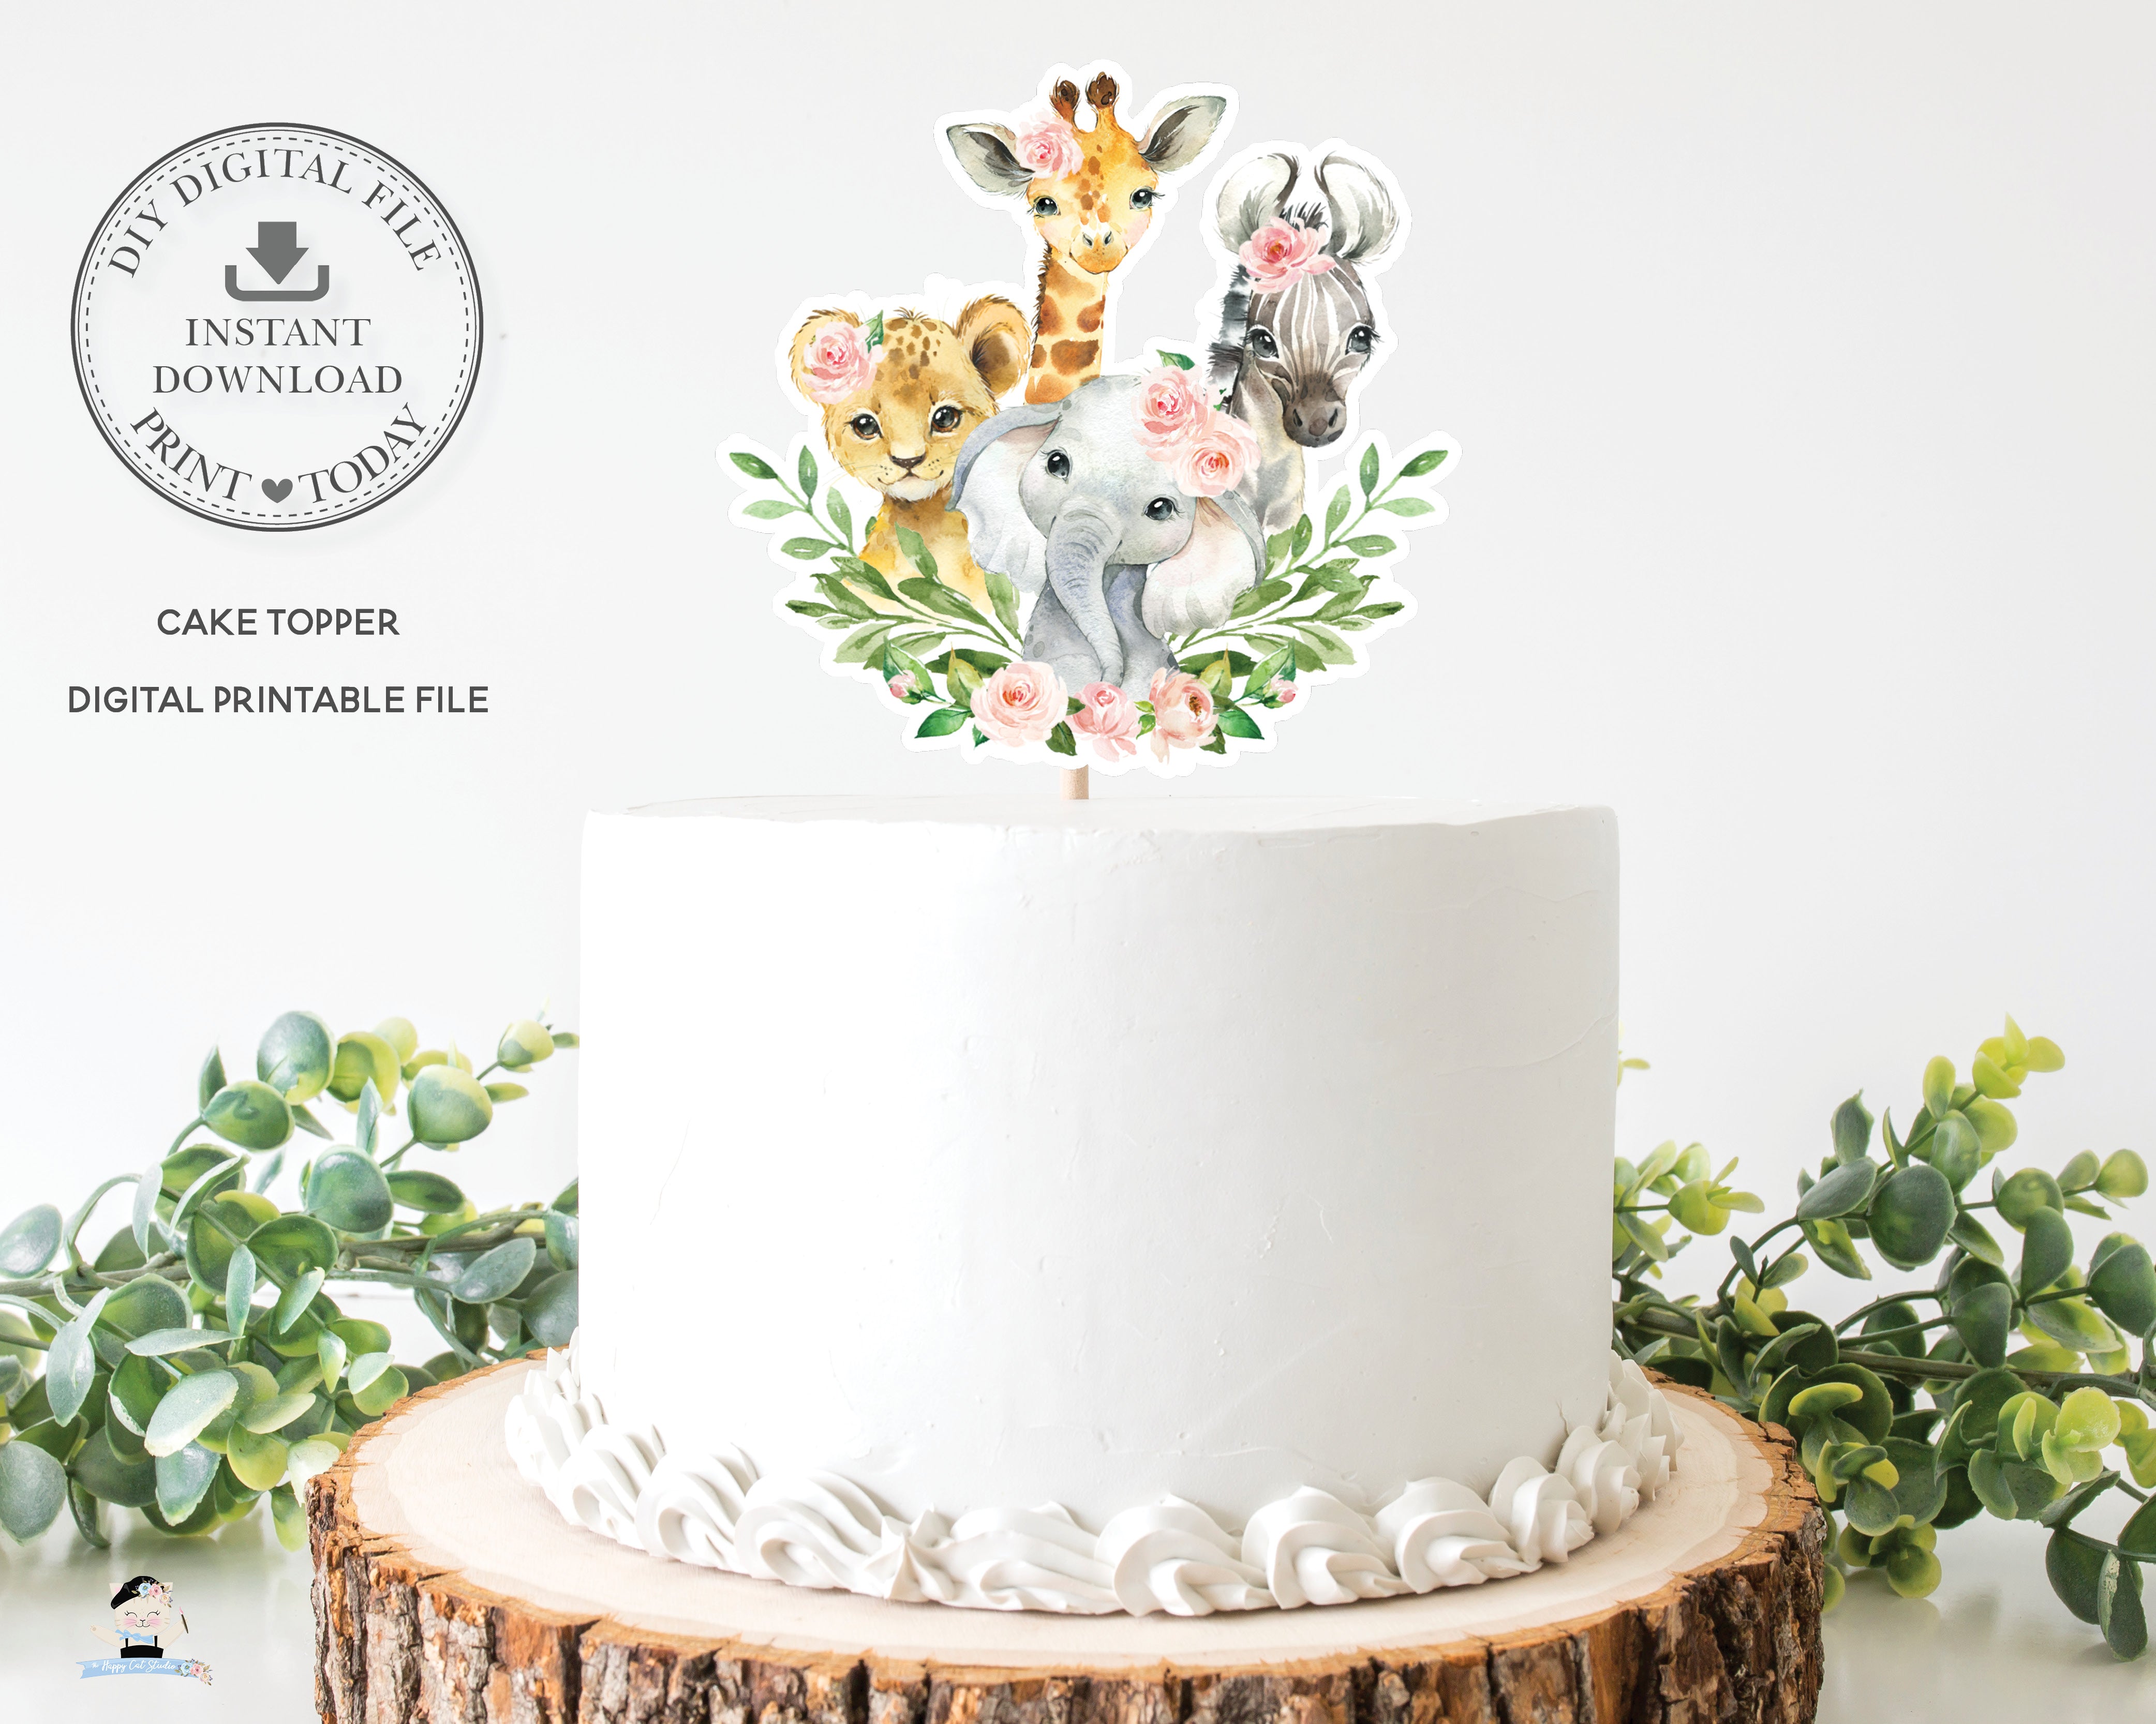 Paper Crafted Baby Shower Cake Topper - Spot of Tea Designs